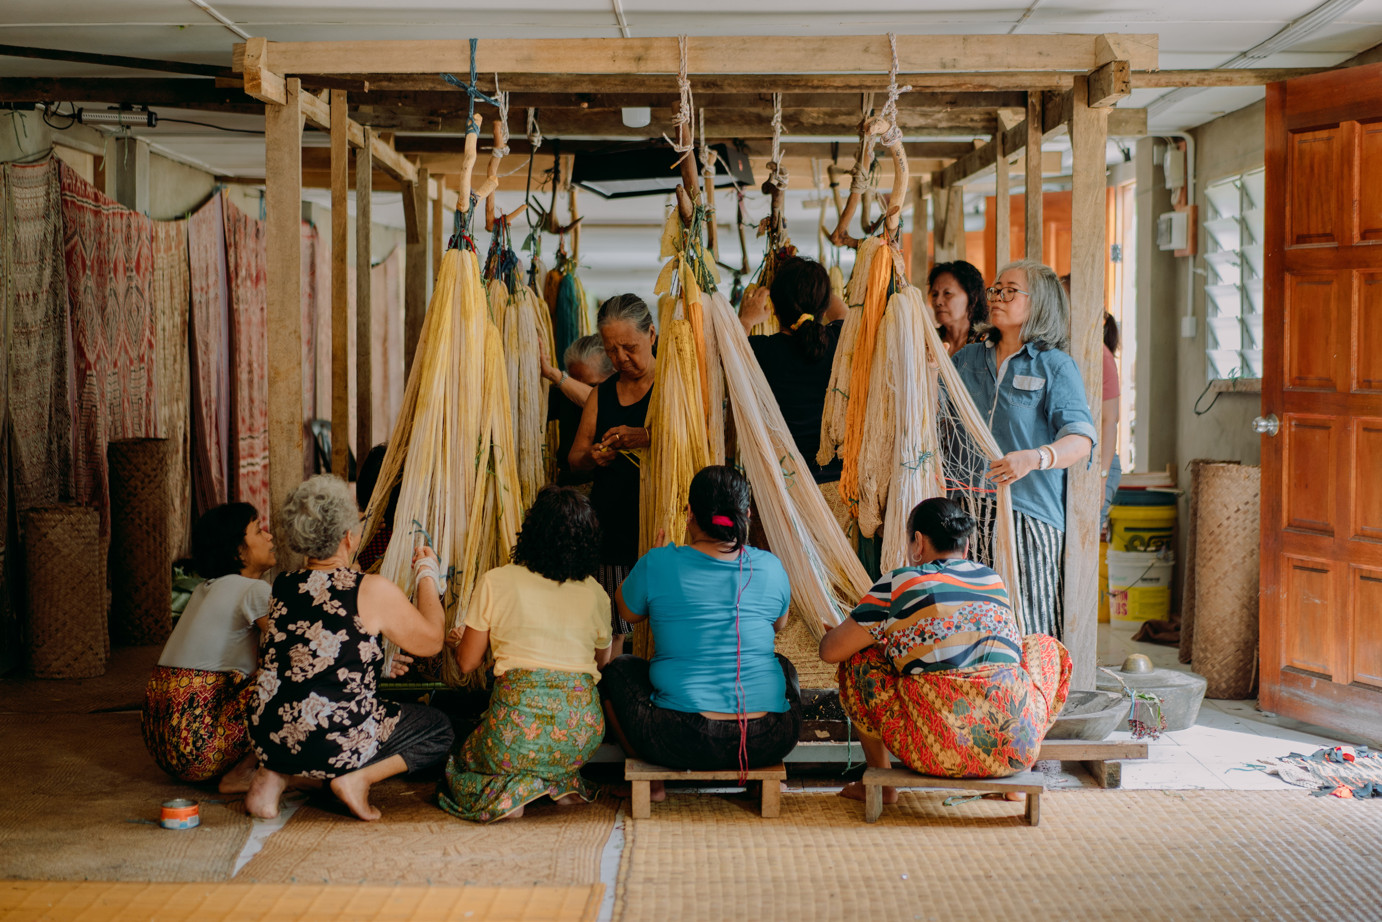 Weavers of rumah gare, preparing their threads for the ngar ritual where they mordant their threads before weaving